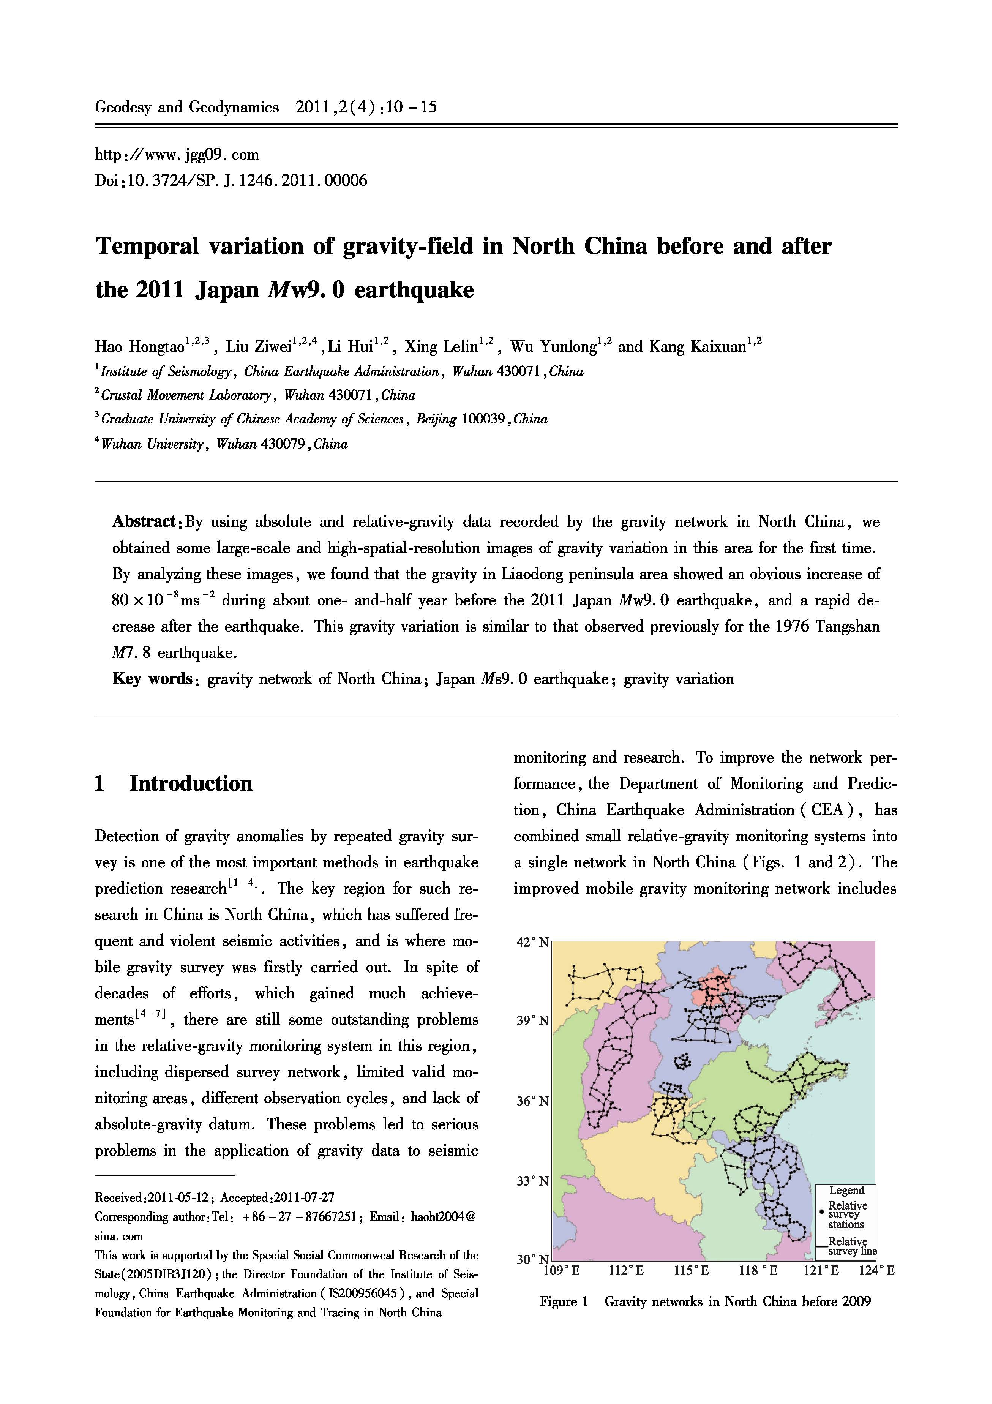 Temporal variation of gravity-field in North China before and after the 2011 Japan Mw9.0 earthquake 